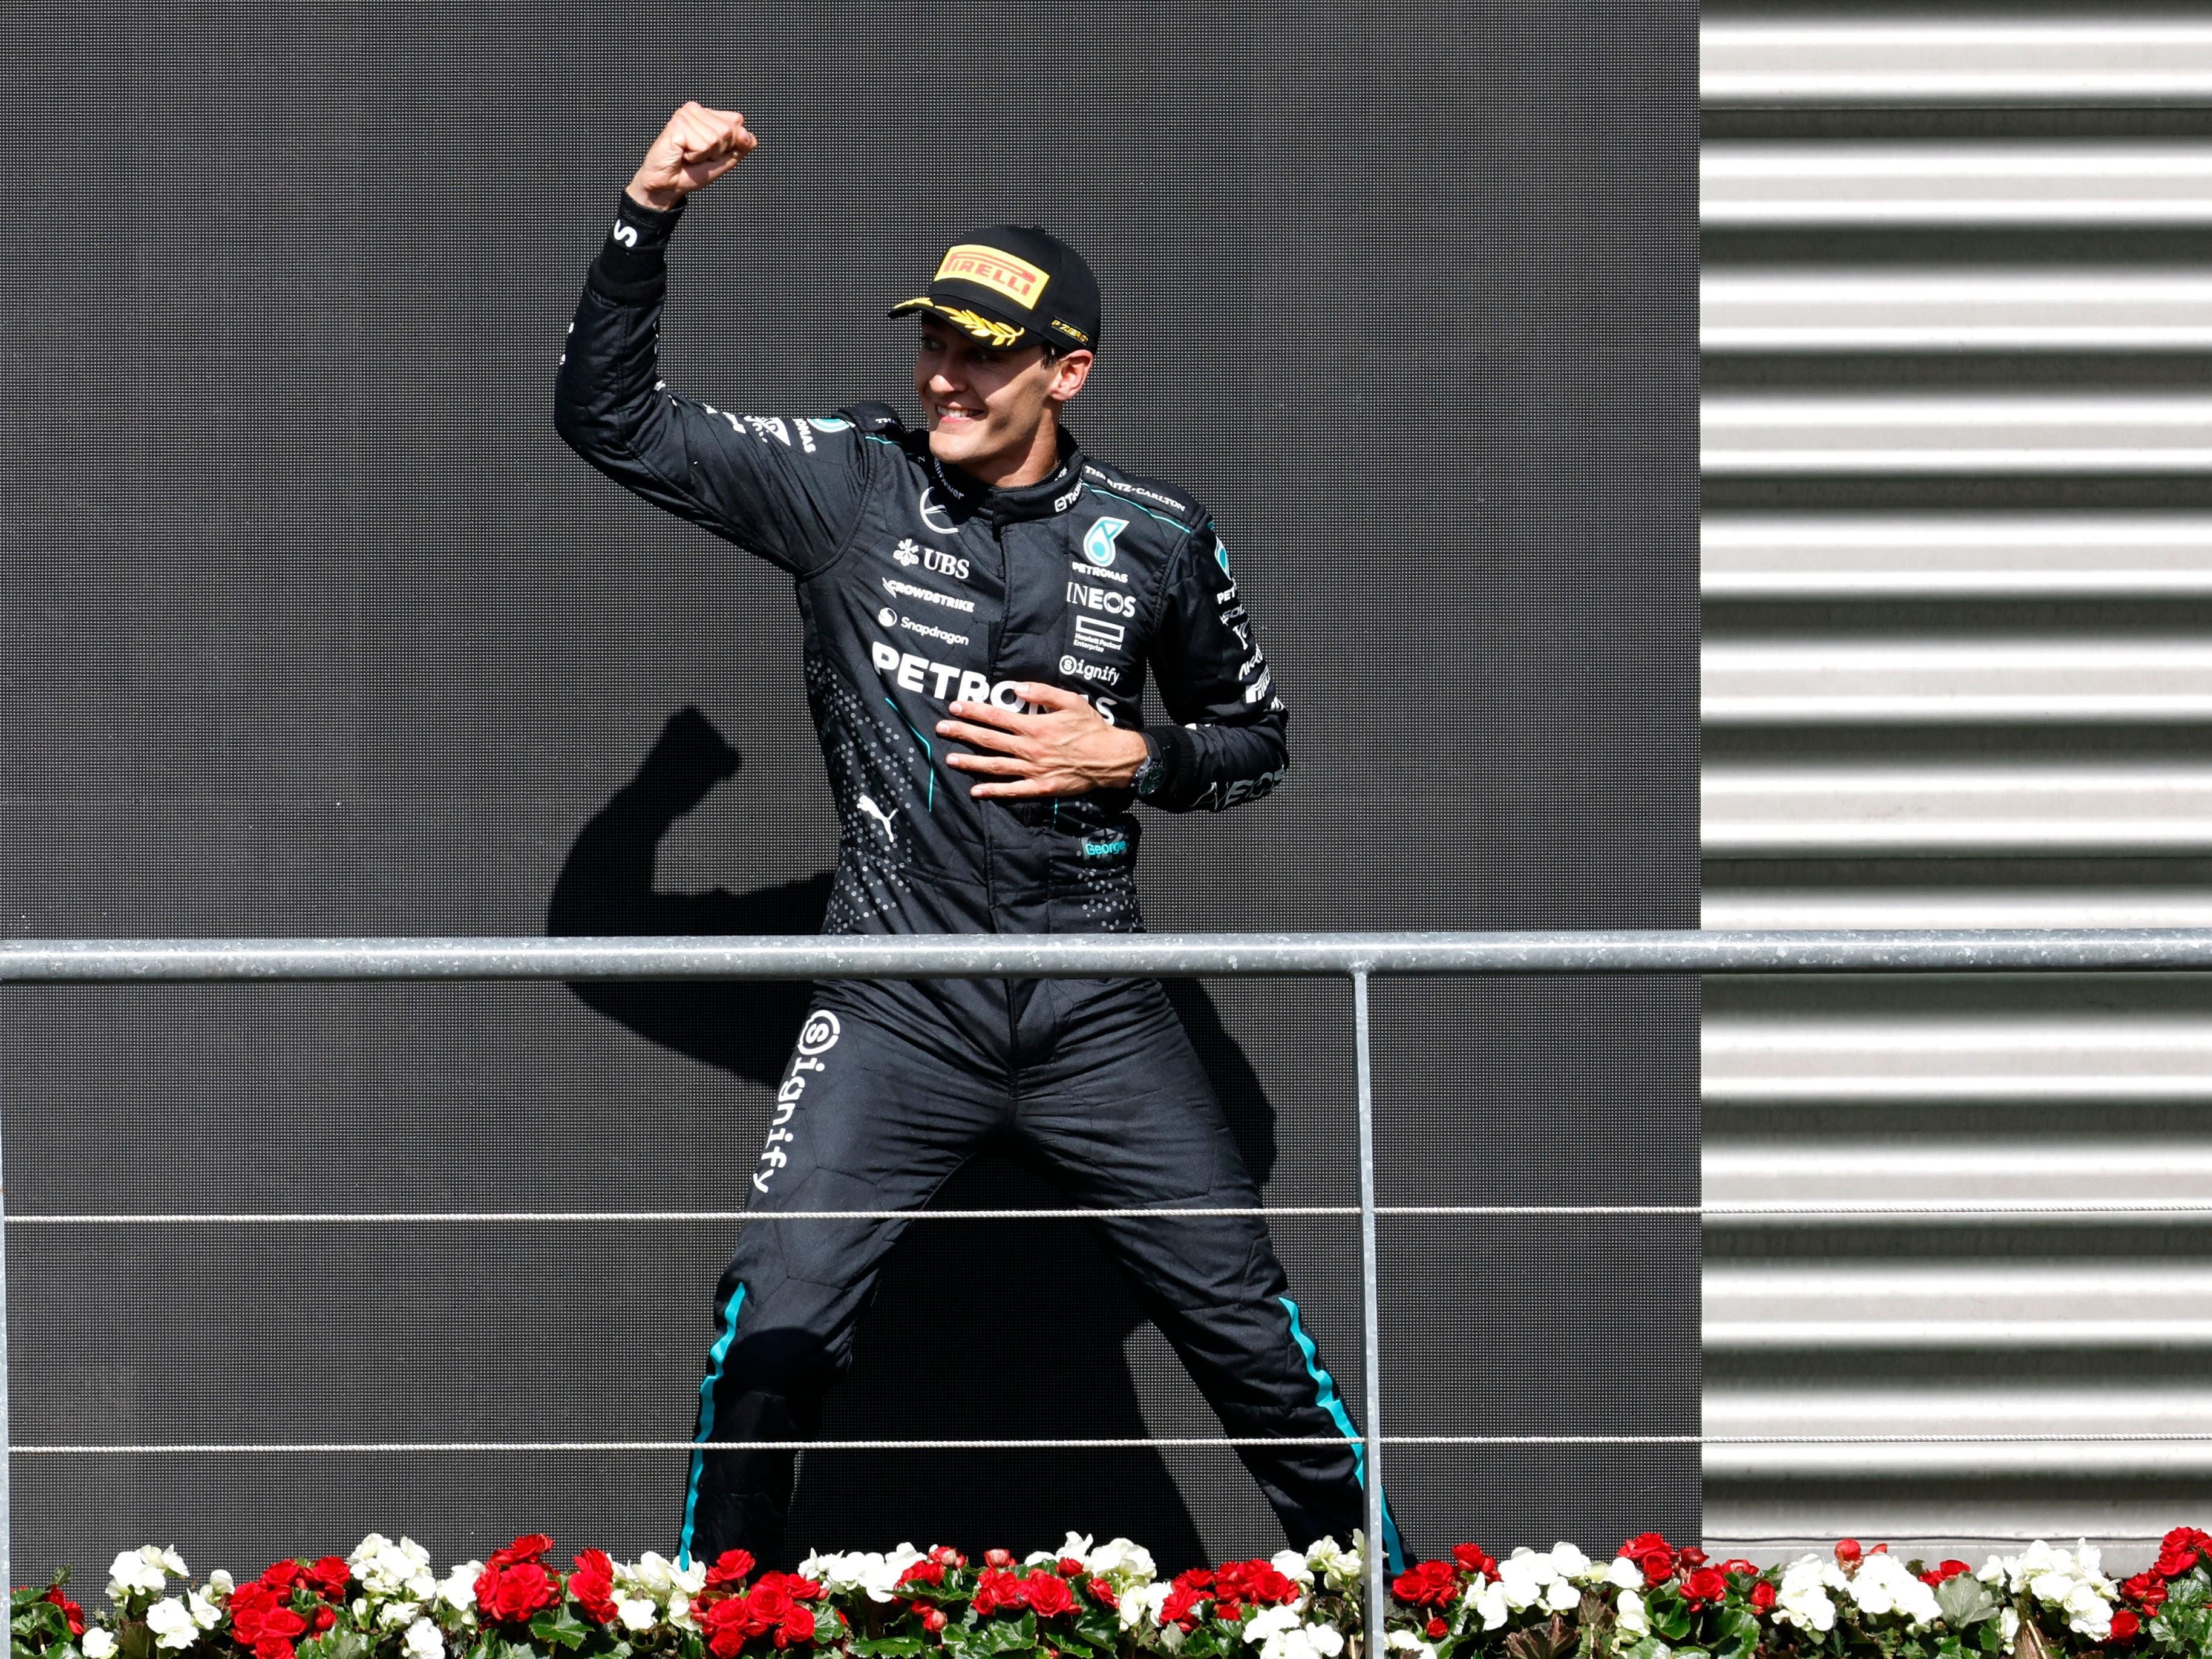 George Russell pips Lewis Hamilton as Mercedes secure one-two at Belgian GP